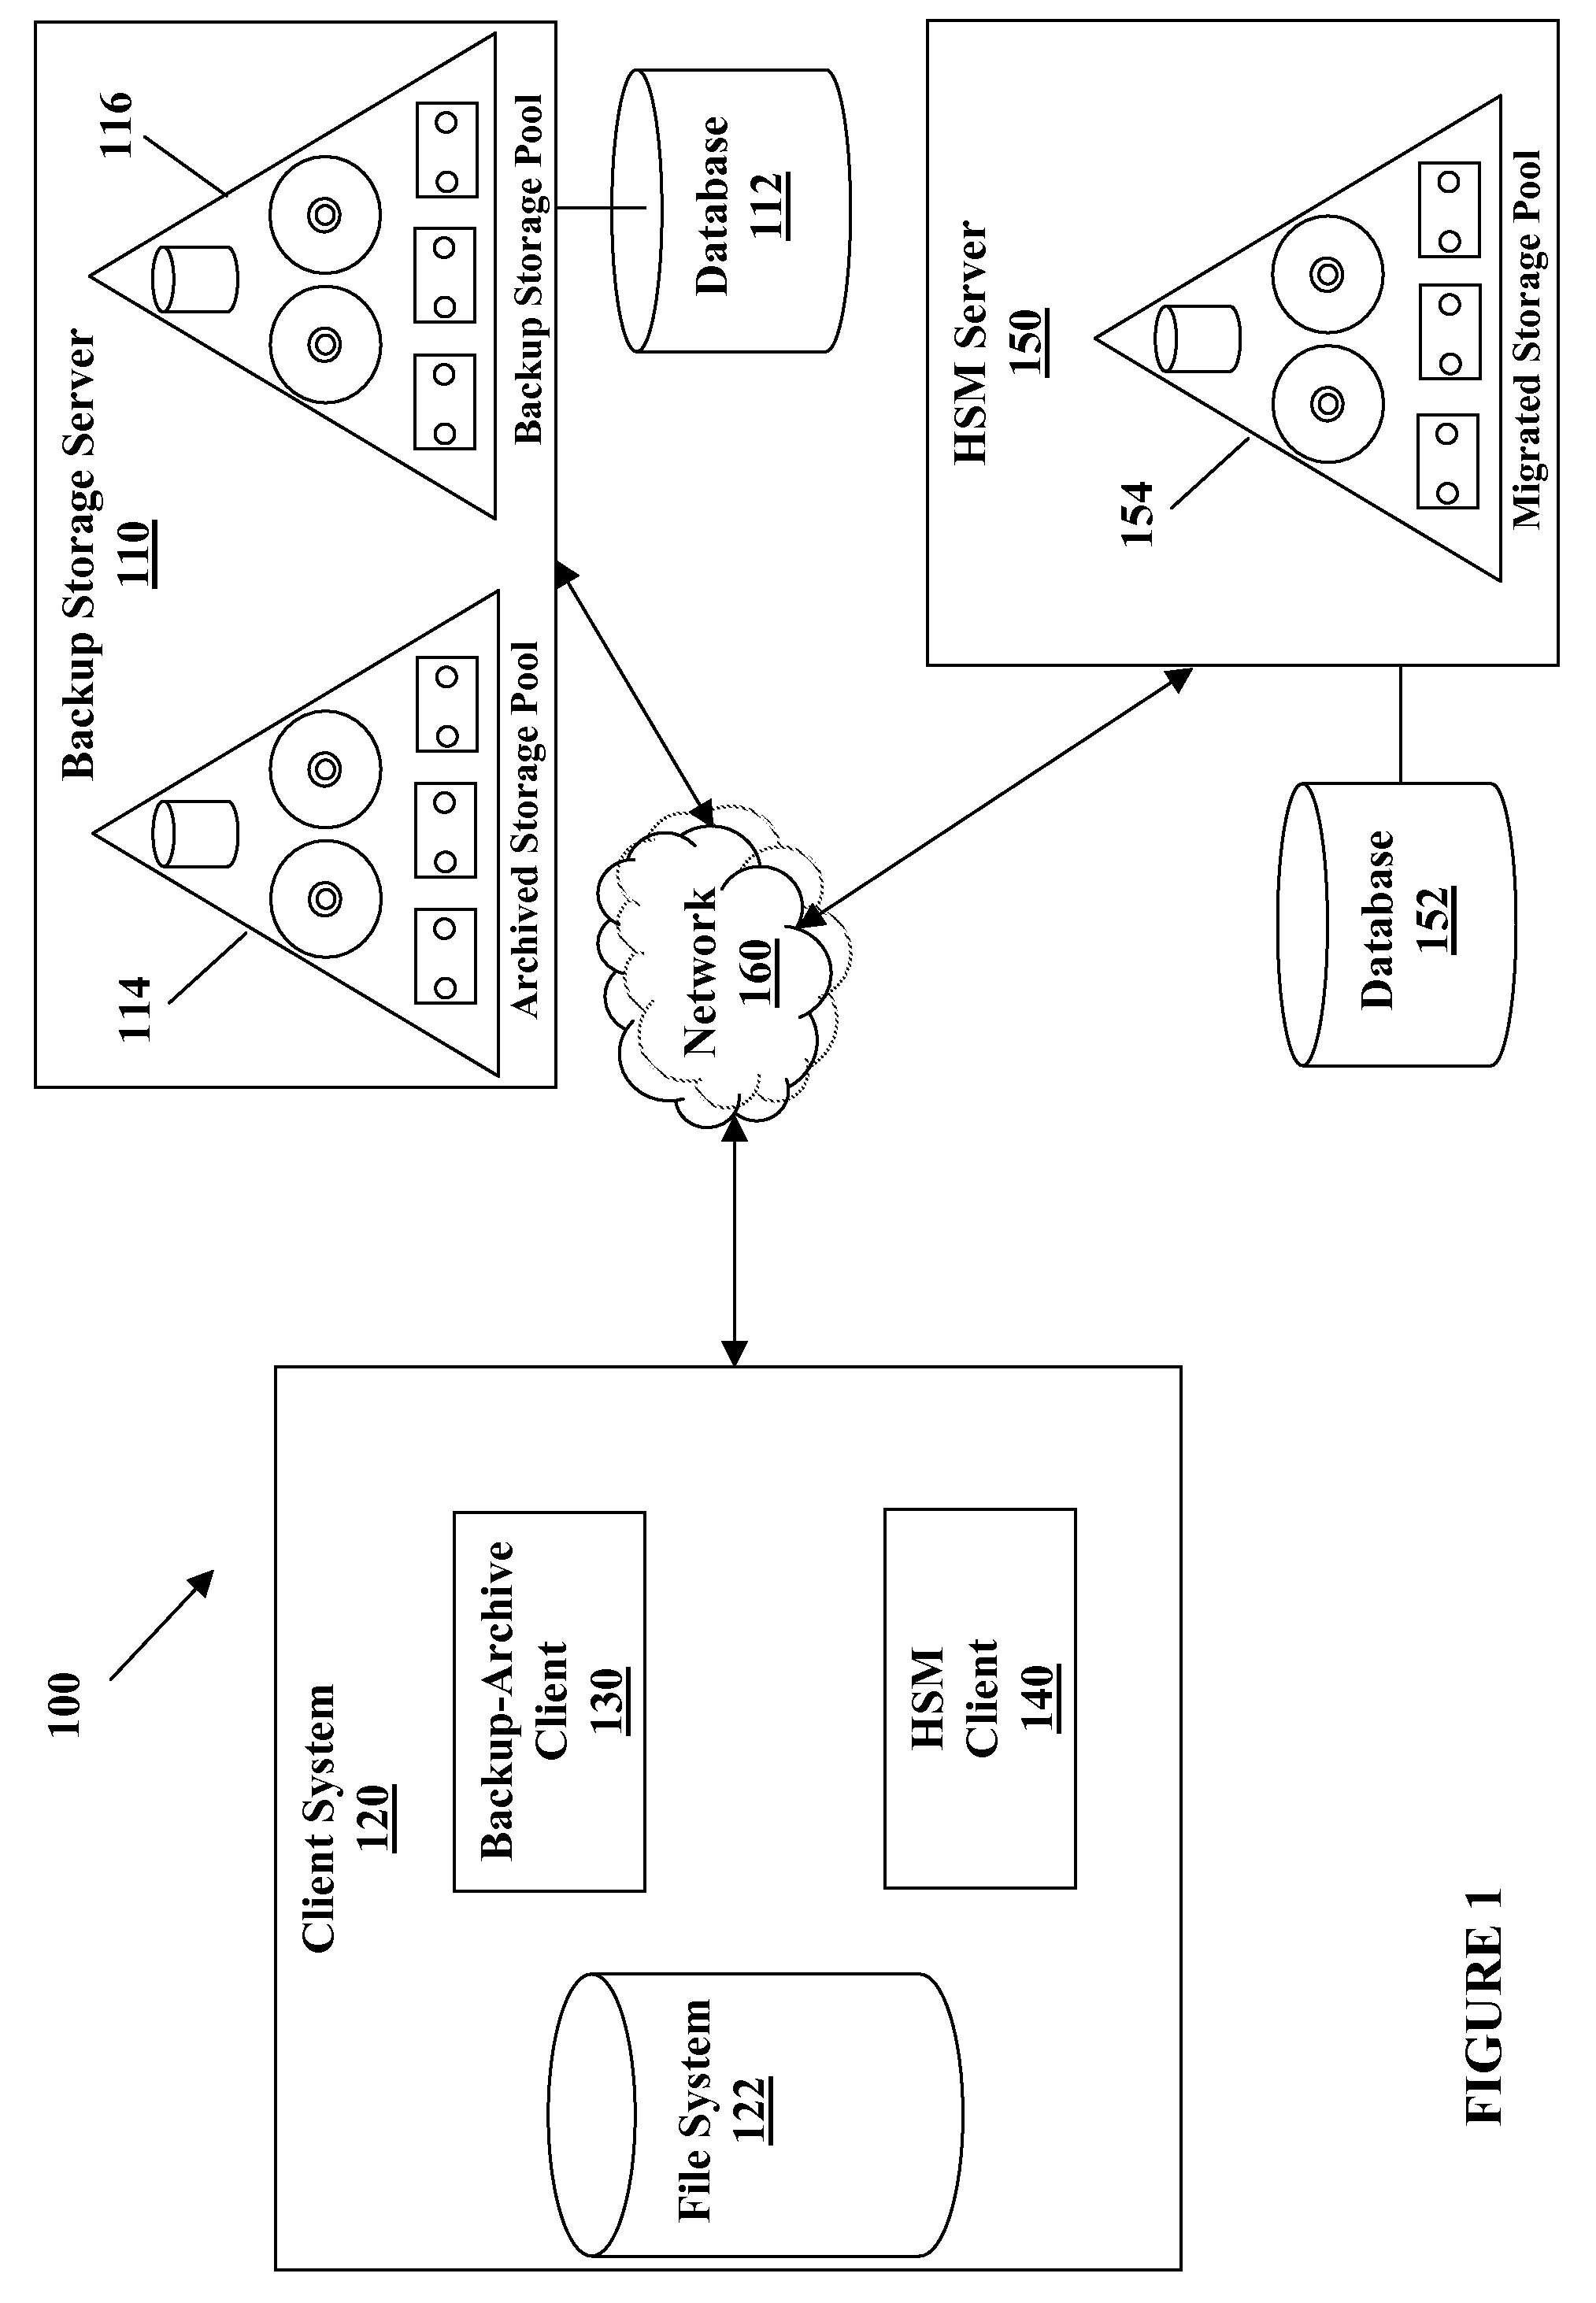 System and method for providing a backup/restore interface for third party hsm clients